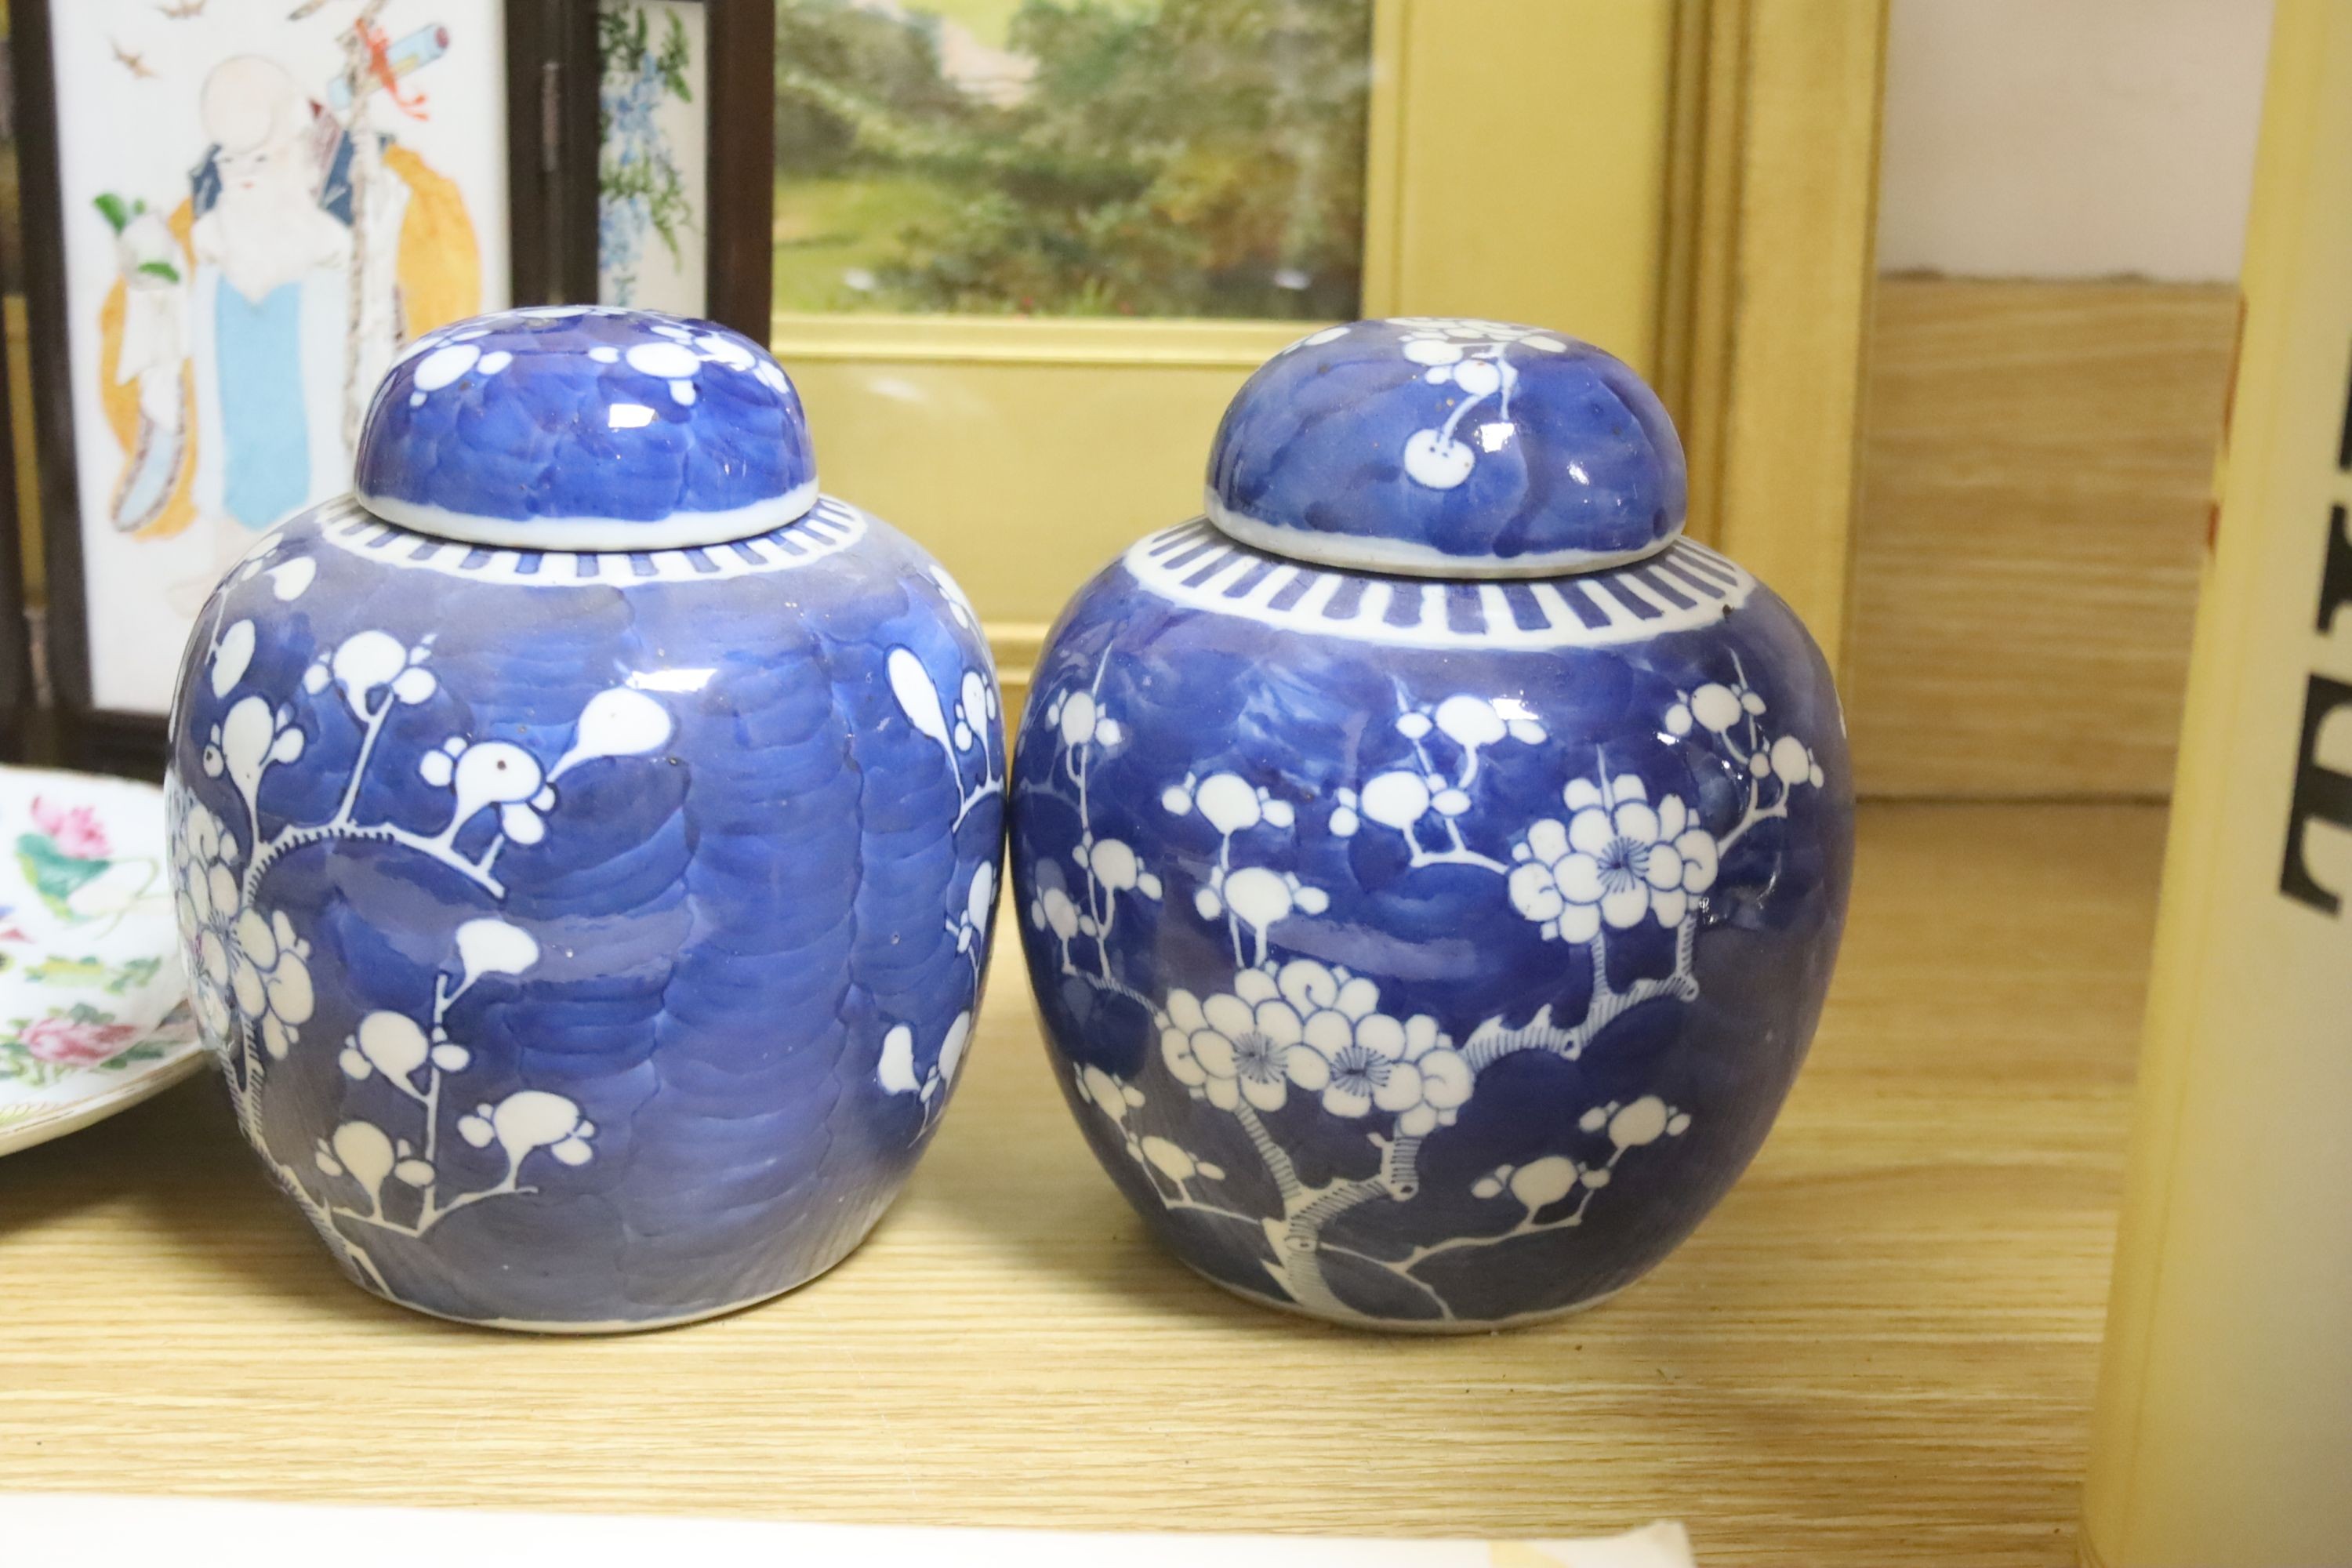 A Chinese miniature porcelain screen, a pair of jars, plate and folio of woodblock prints